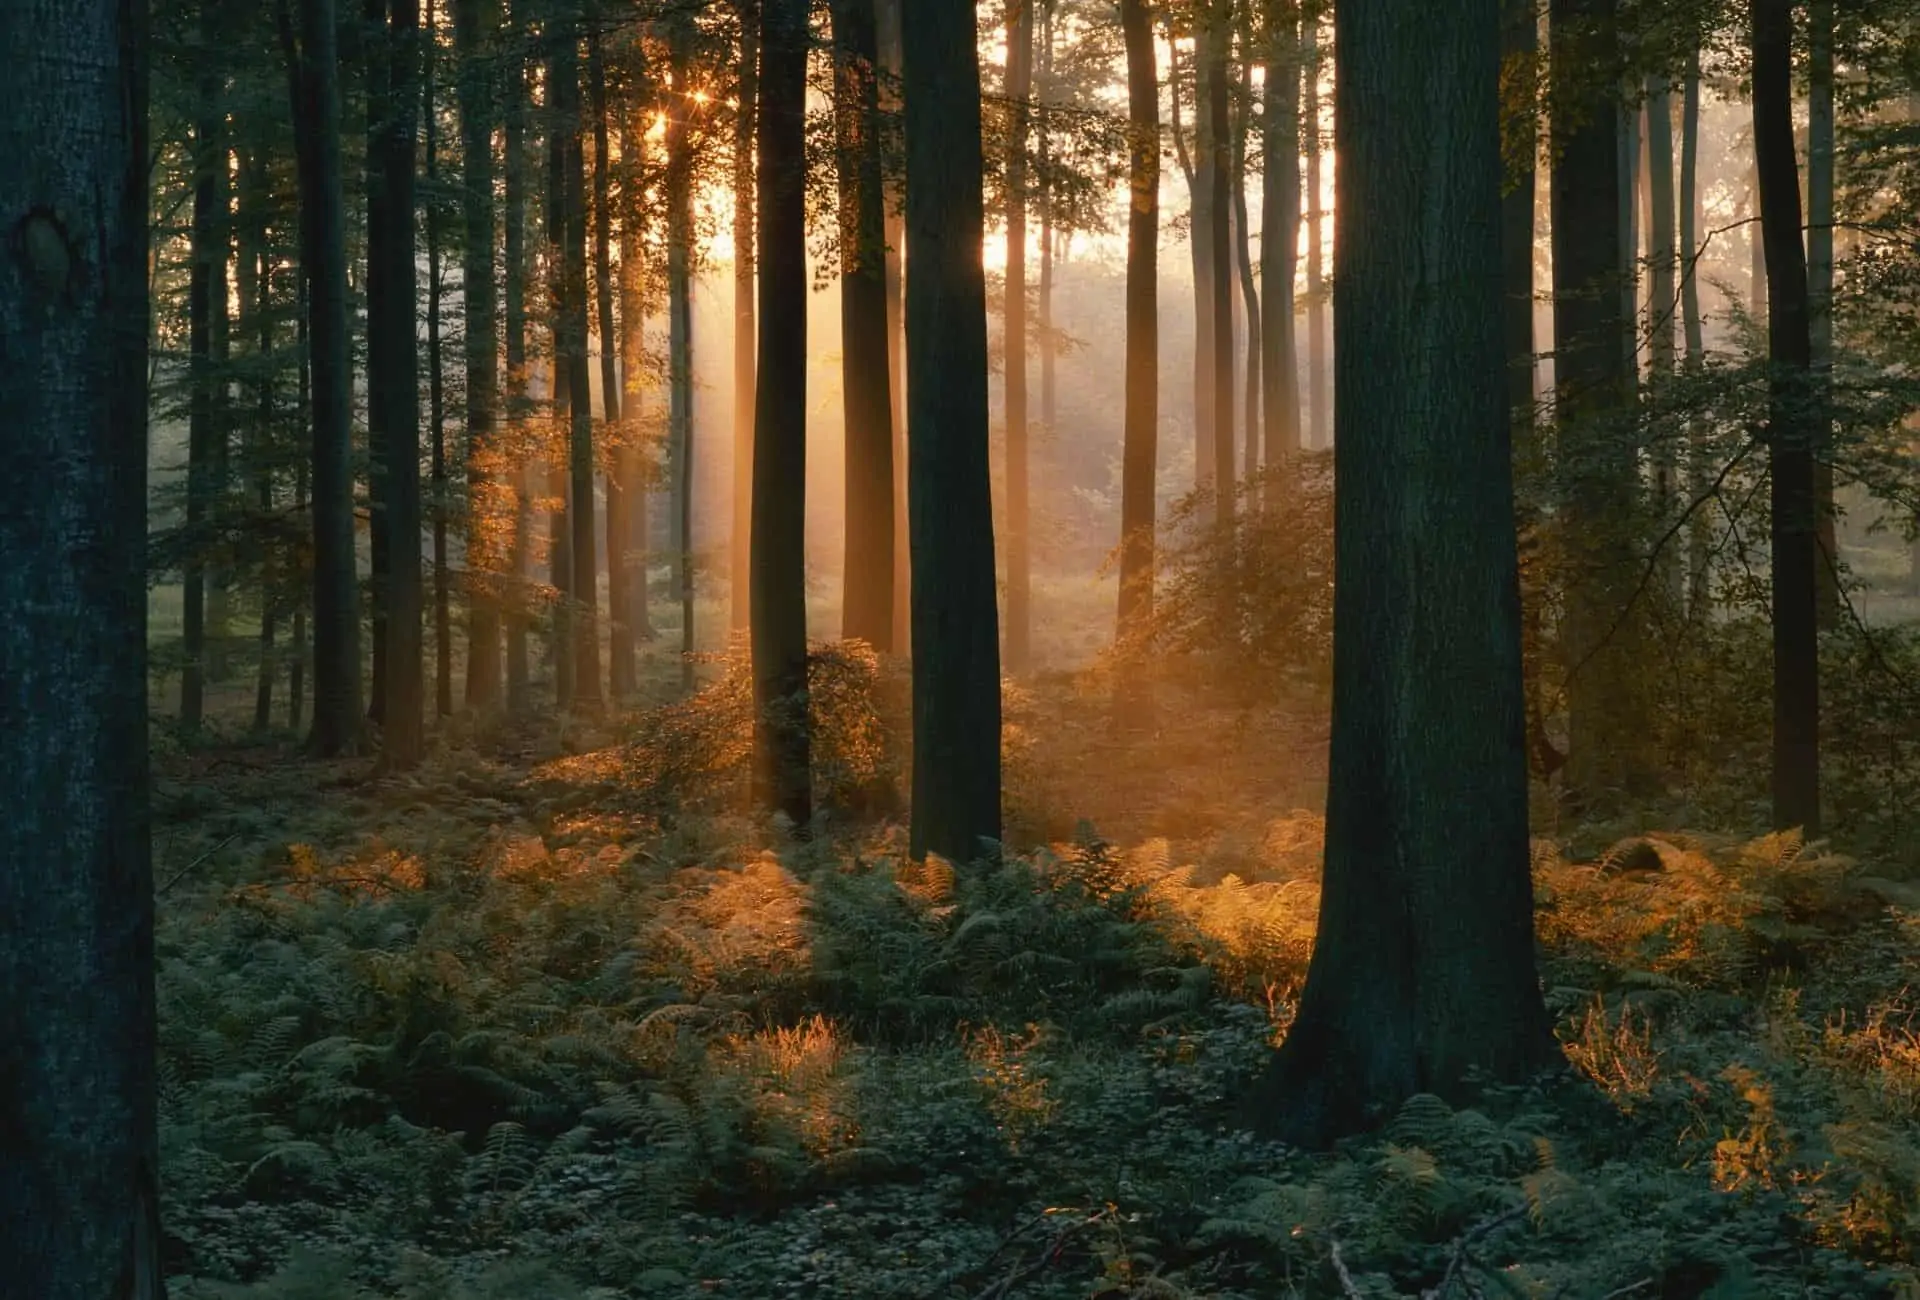 Forest at dust with sun peaking through the trees.